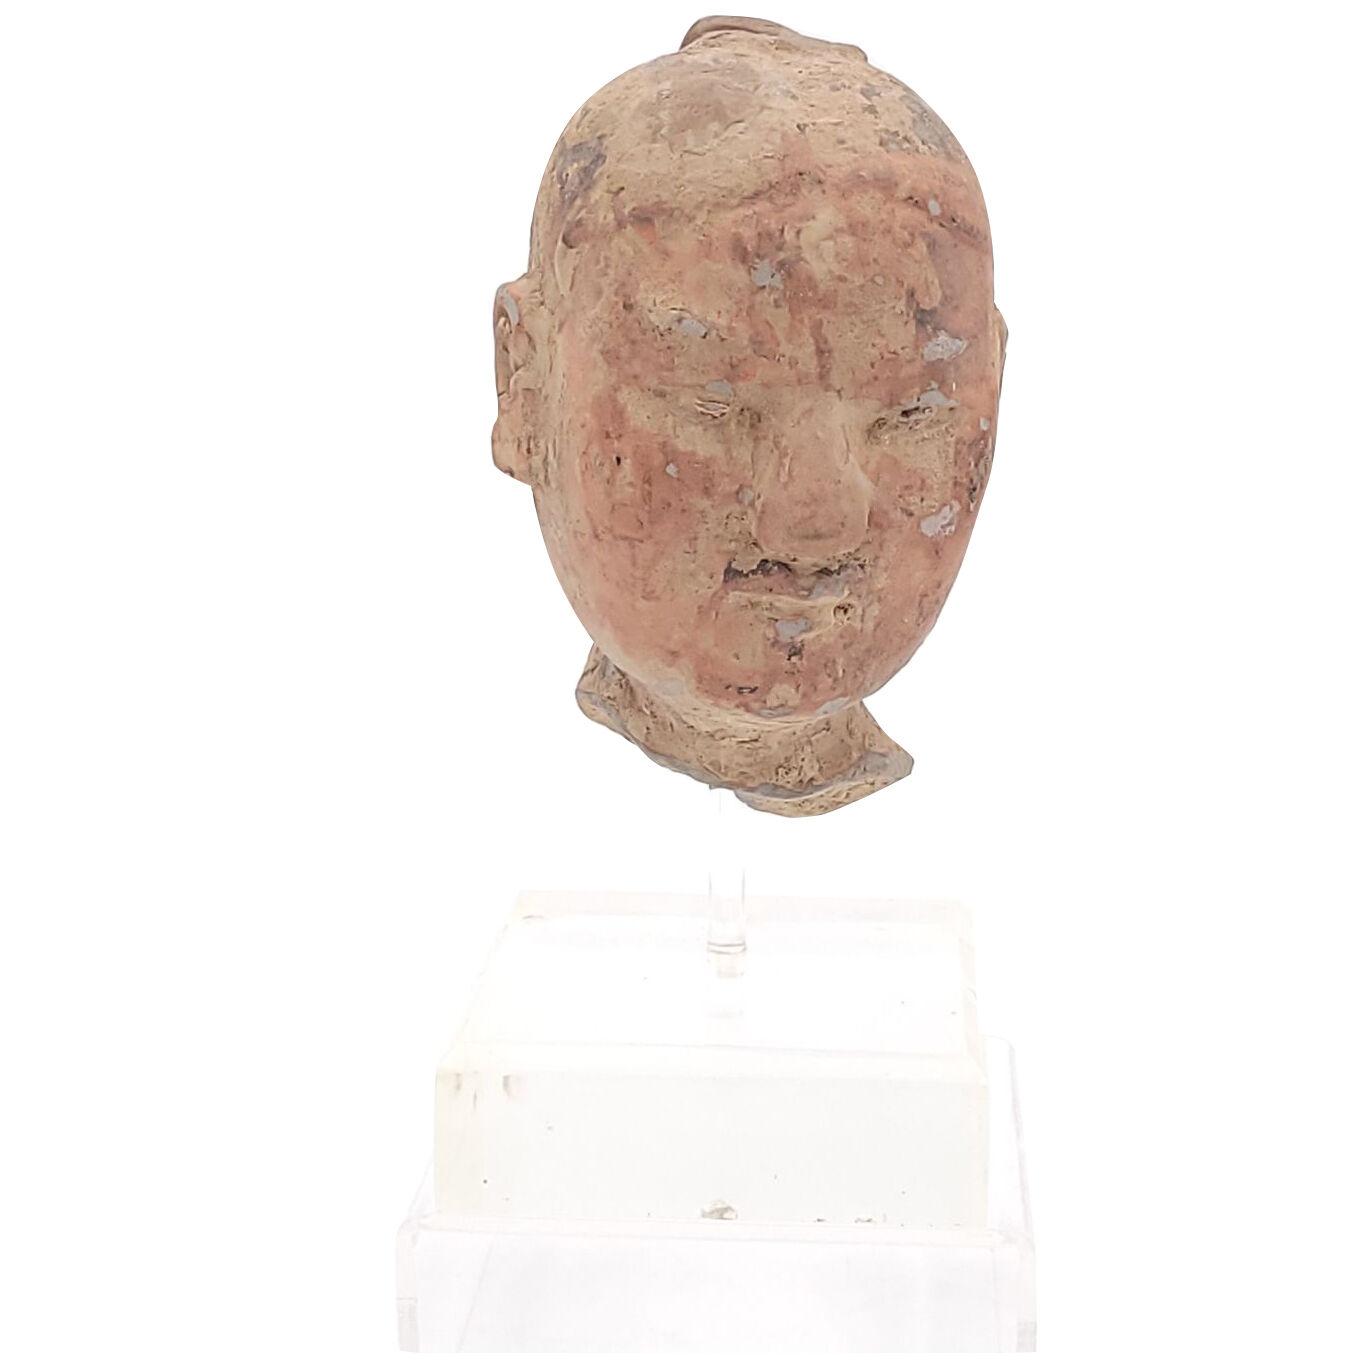 Han Dynasty Head from a Soldier's Figure, from the Tomb of the First Emperor